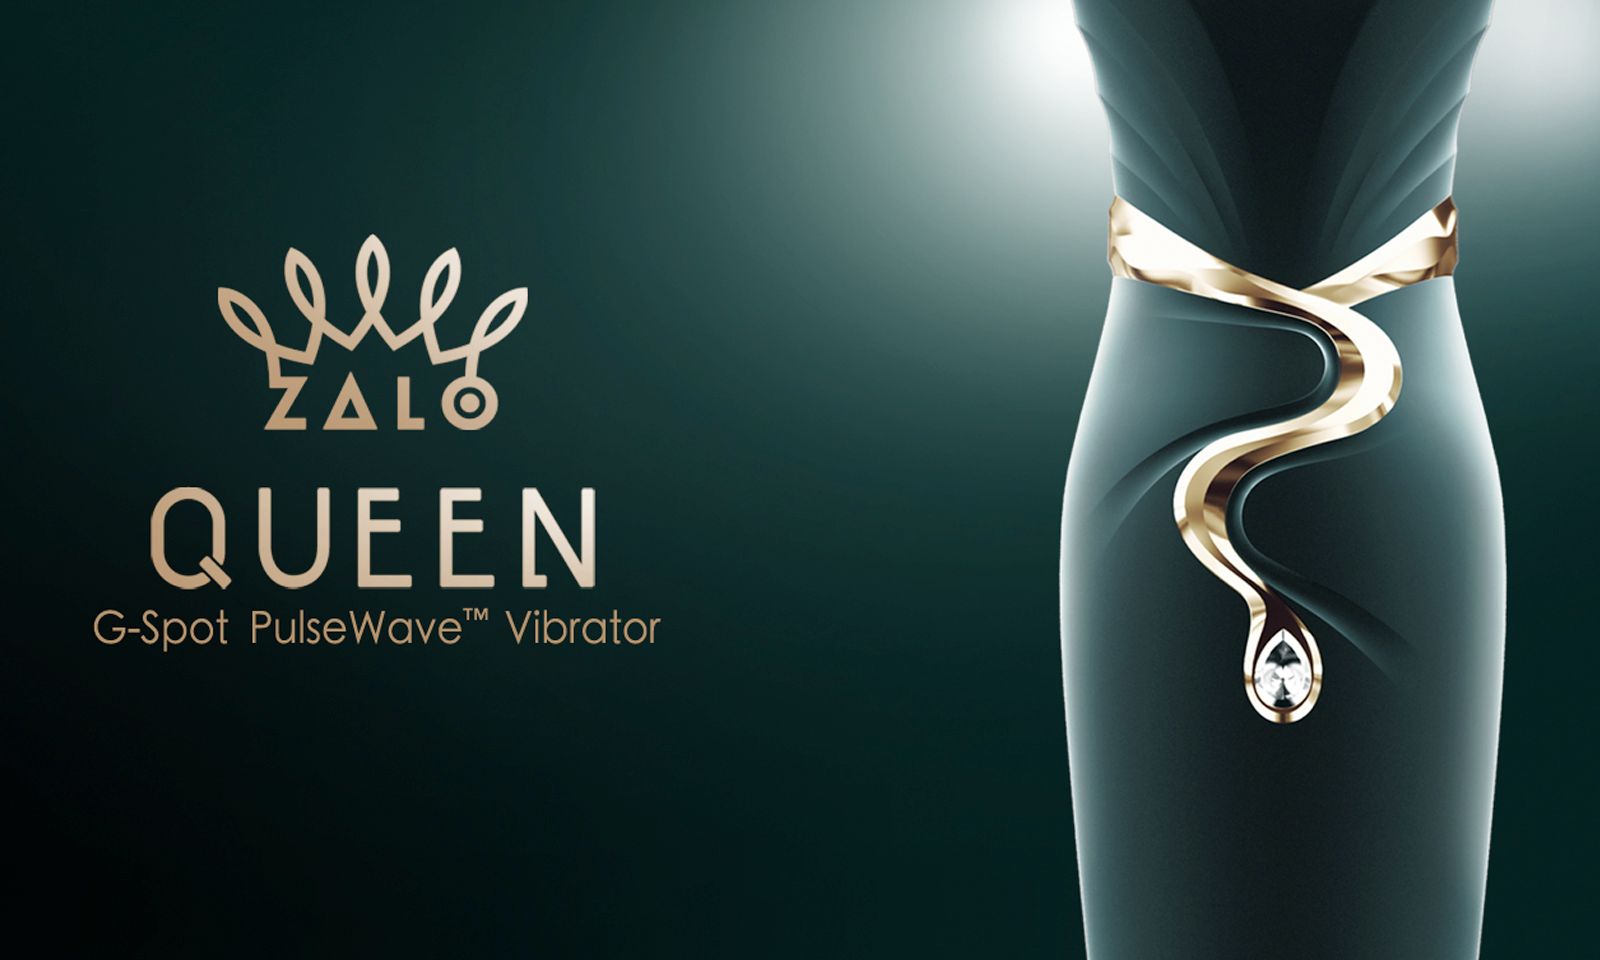 Zalo Launches Egyptian-Inspired Queen Collection